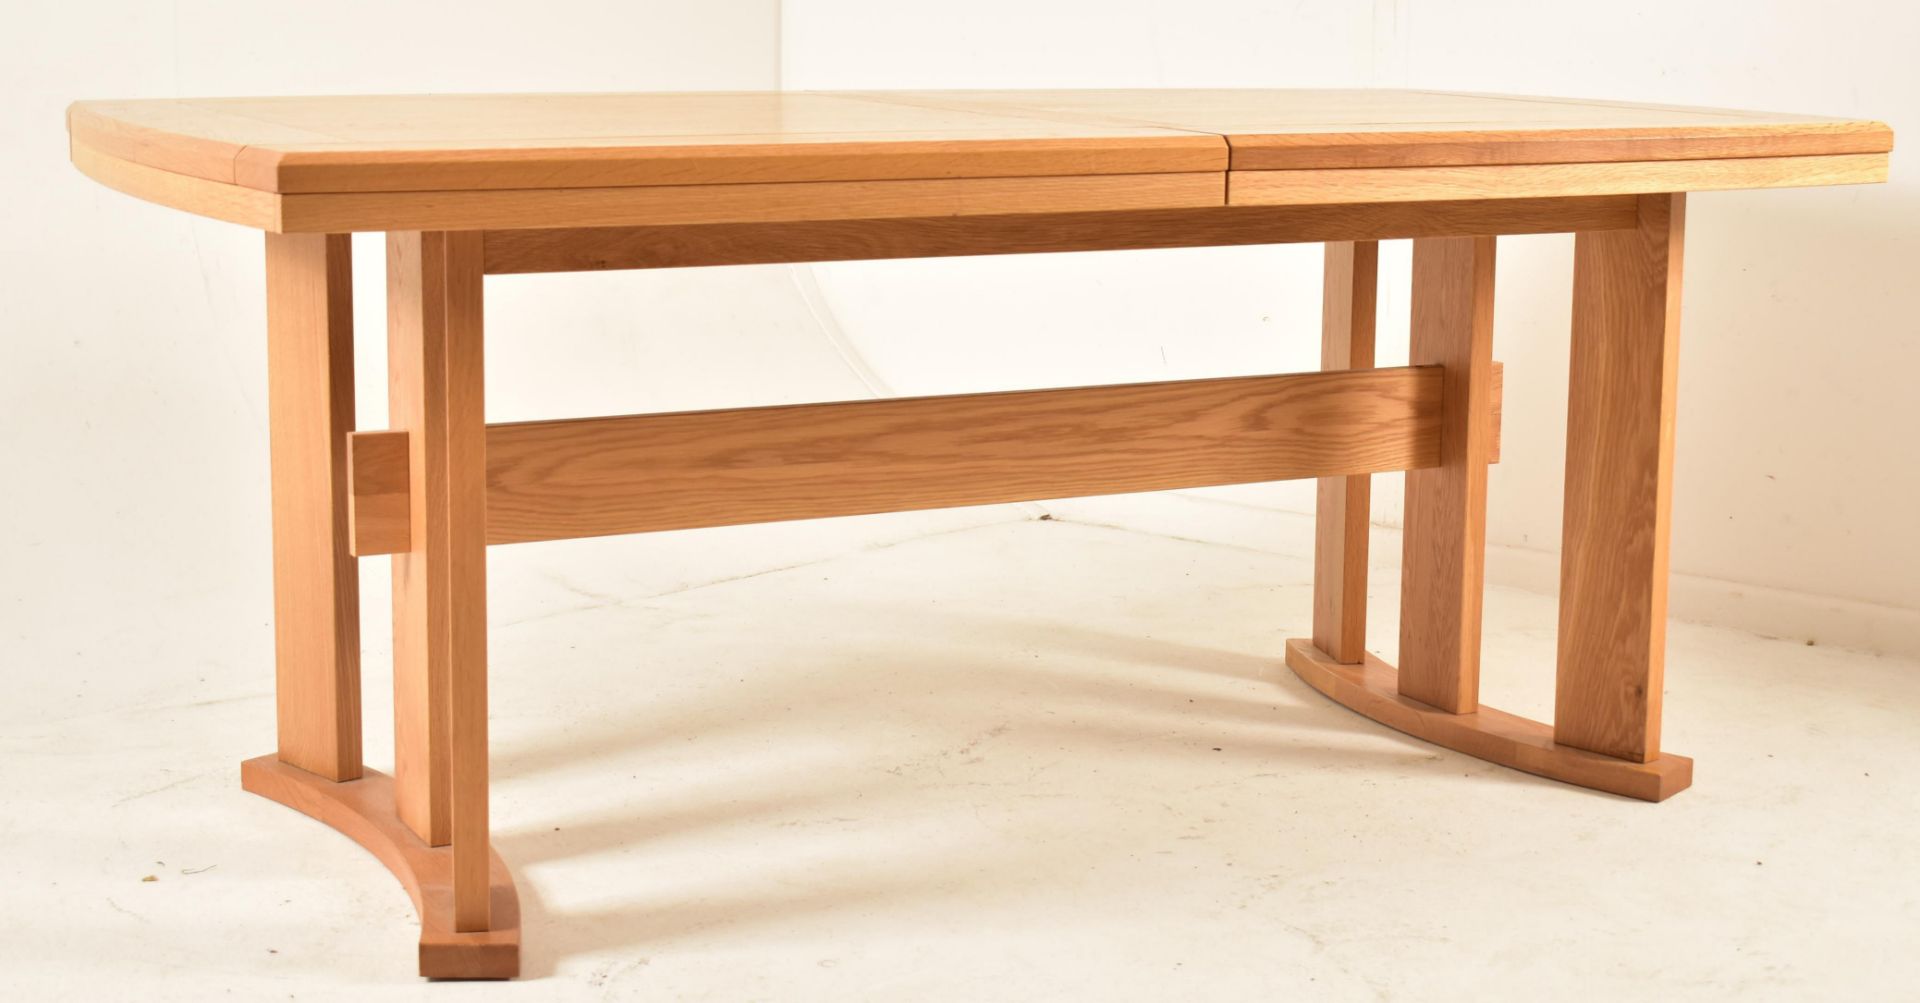 CONTEMPORARY HIGH END BRITISH DESIGN OAK DINING TABLE